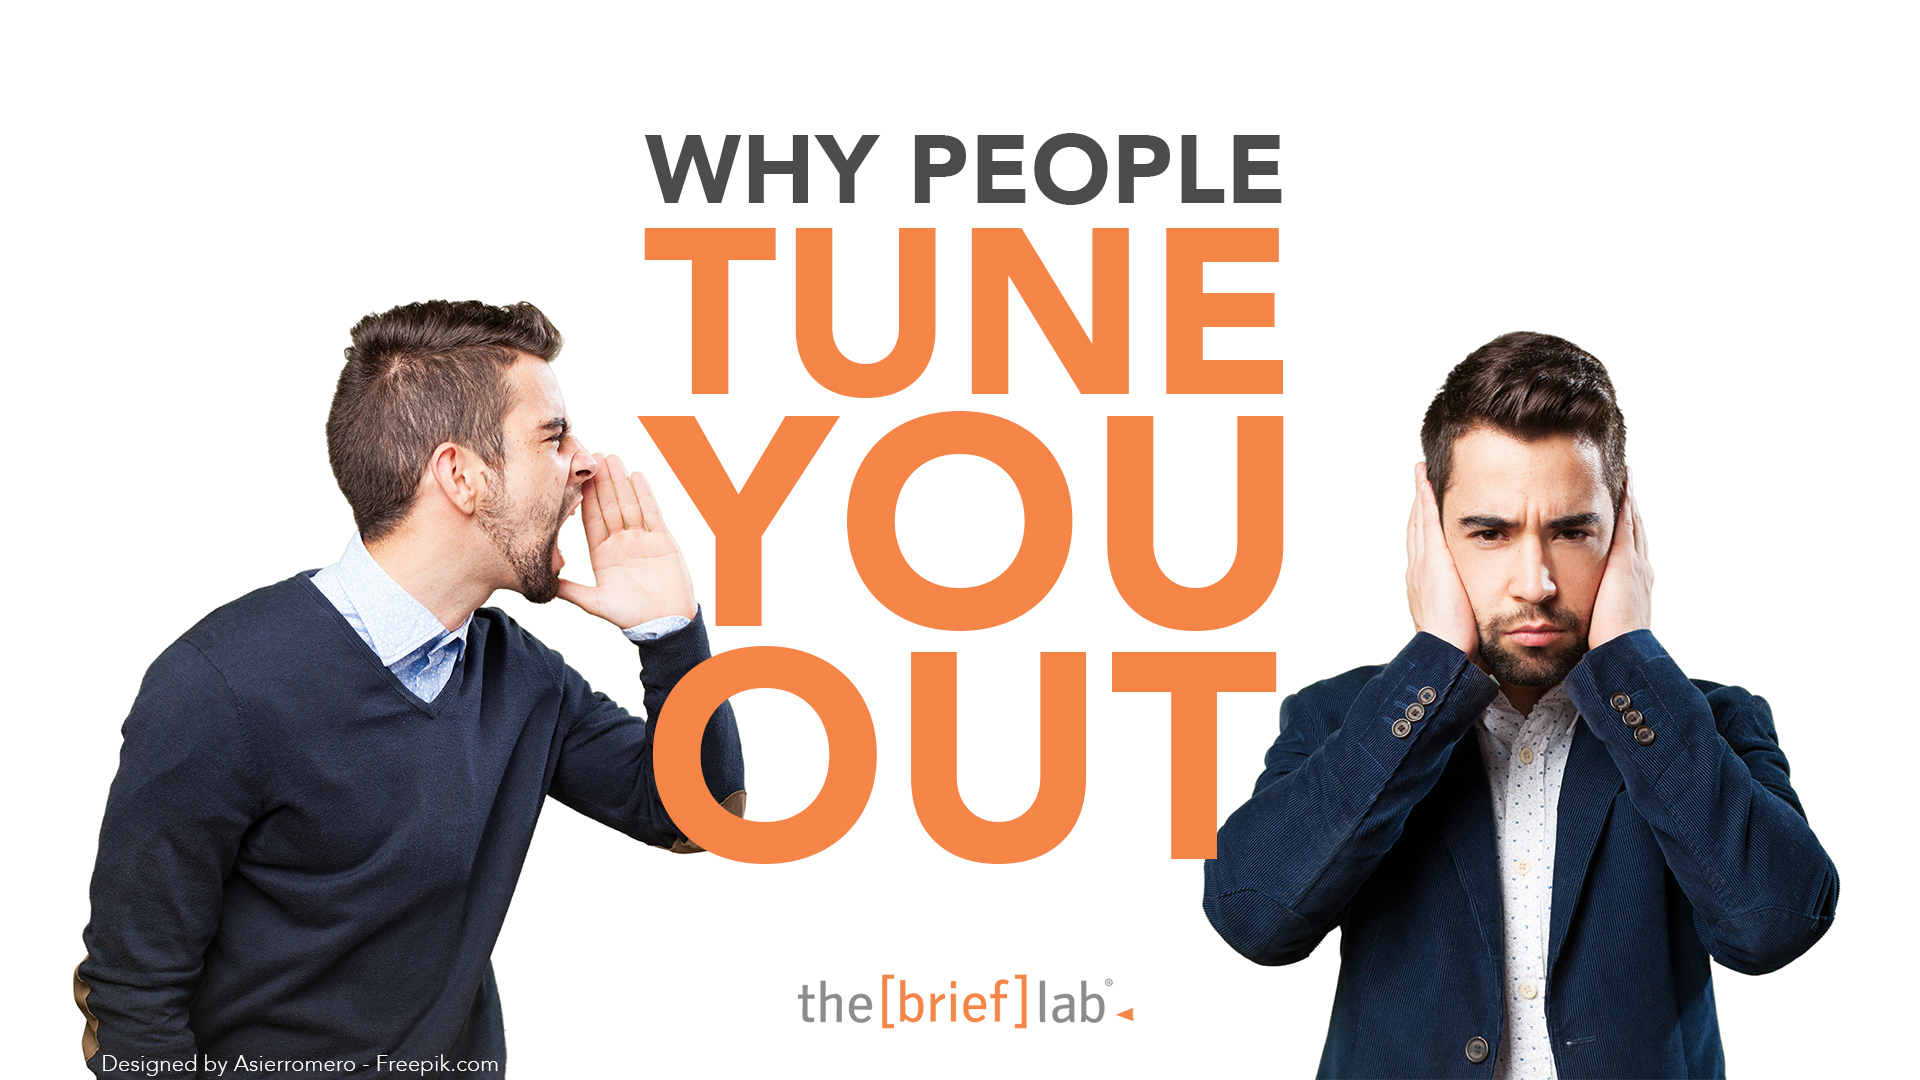 4 reasons people tune you out